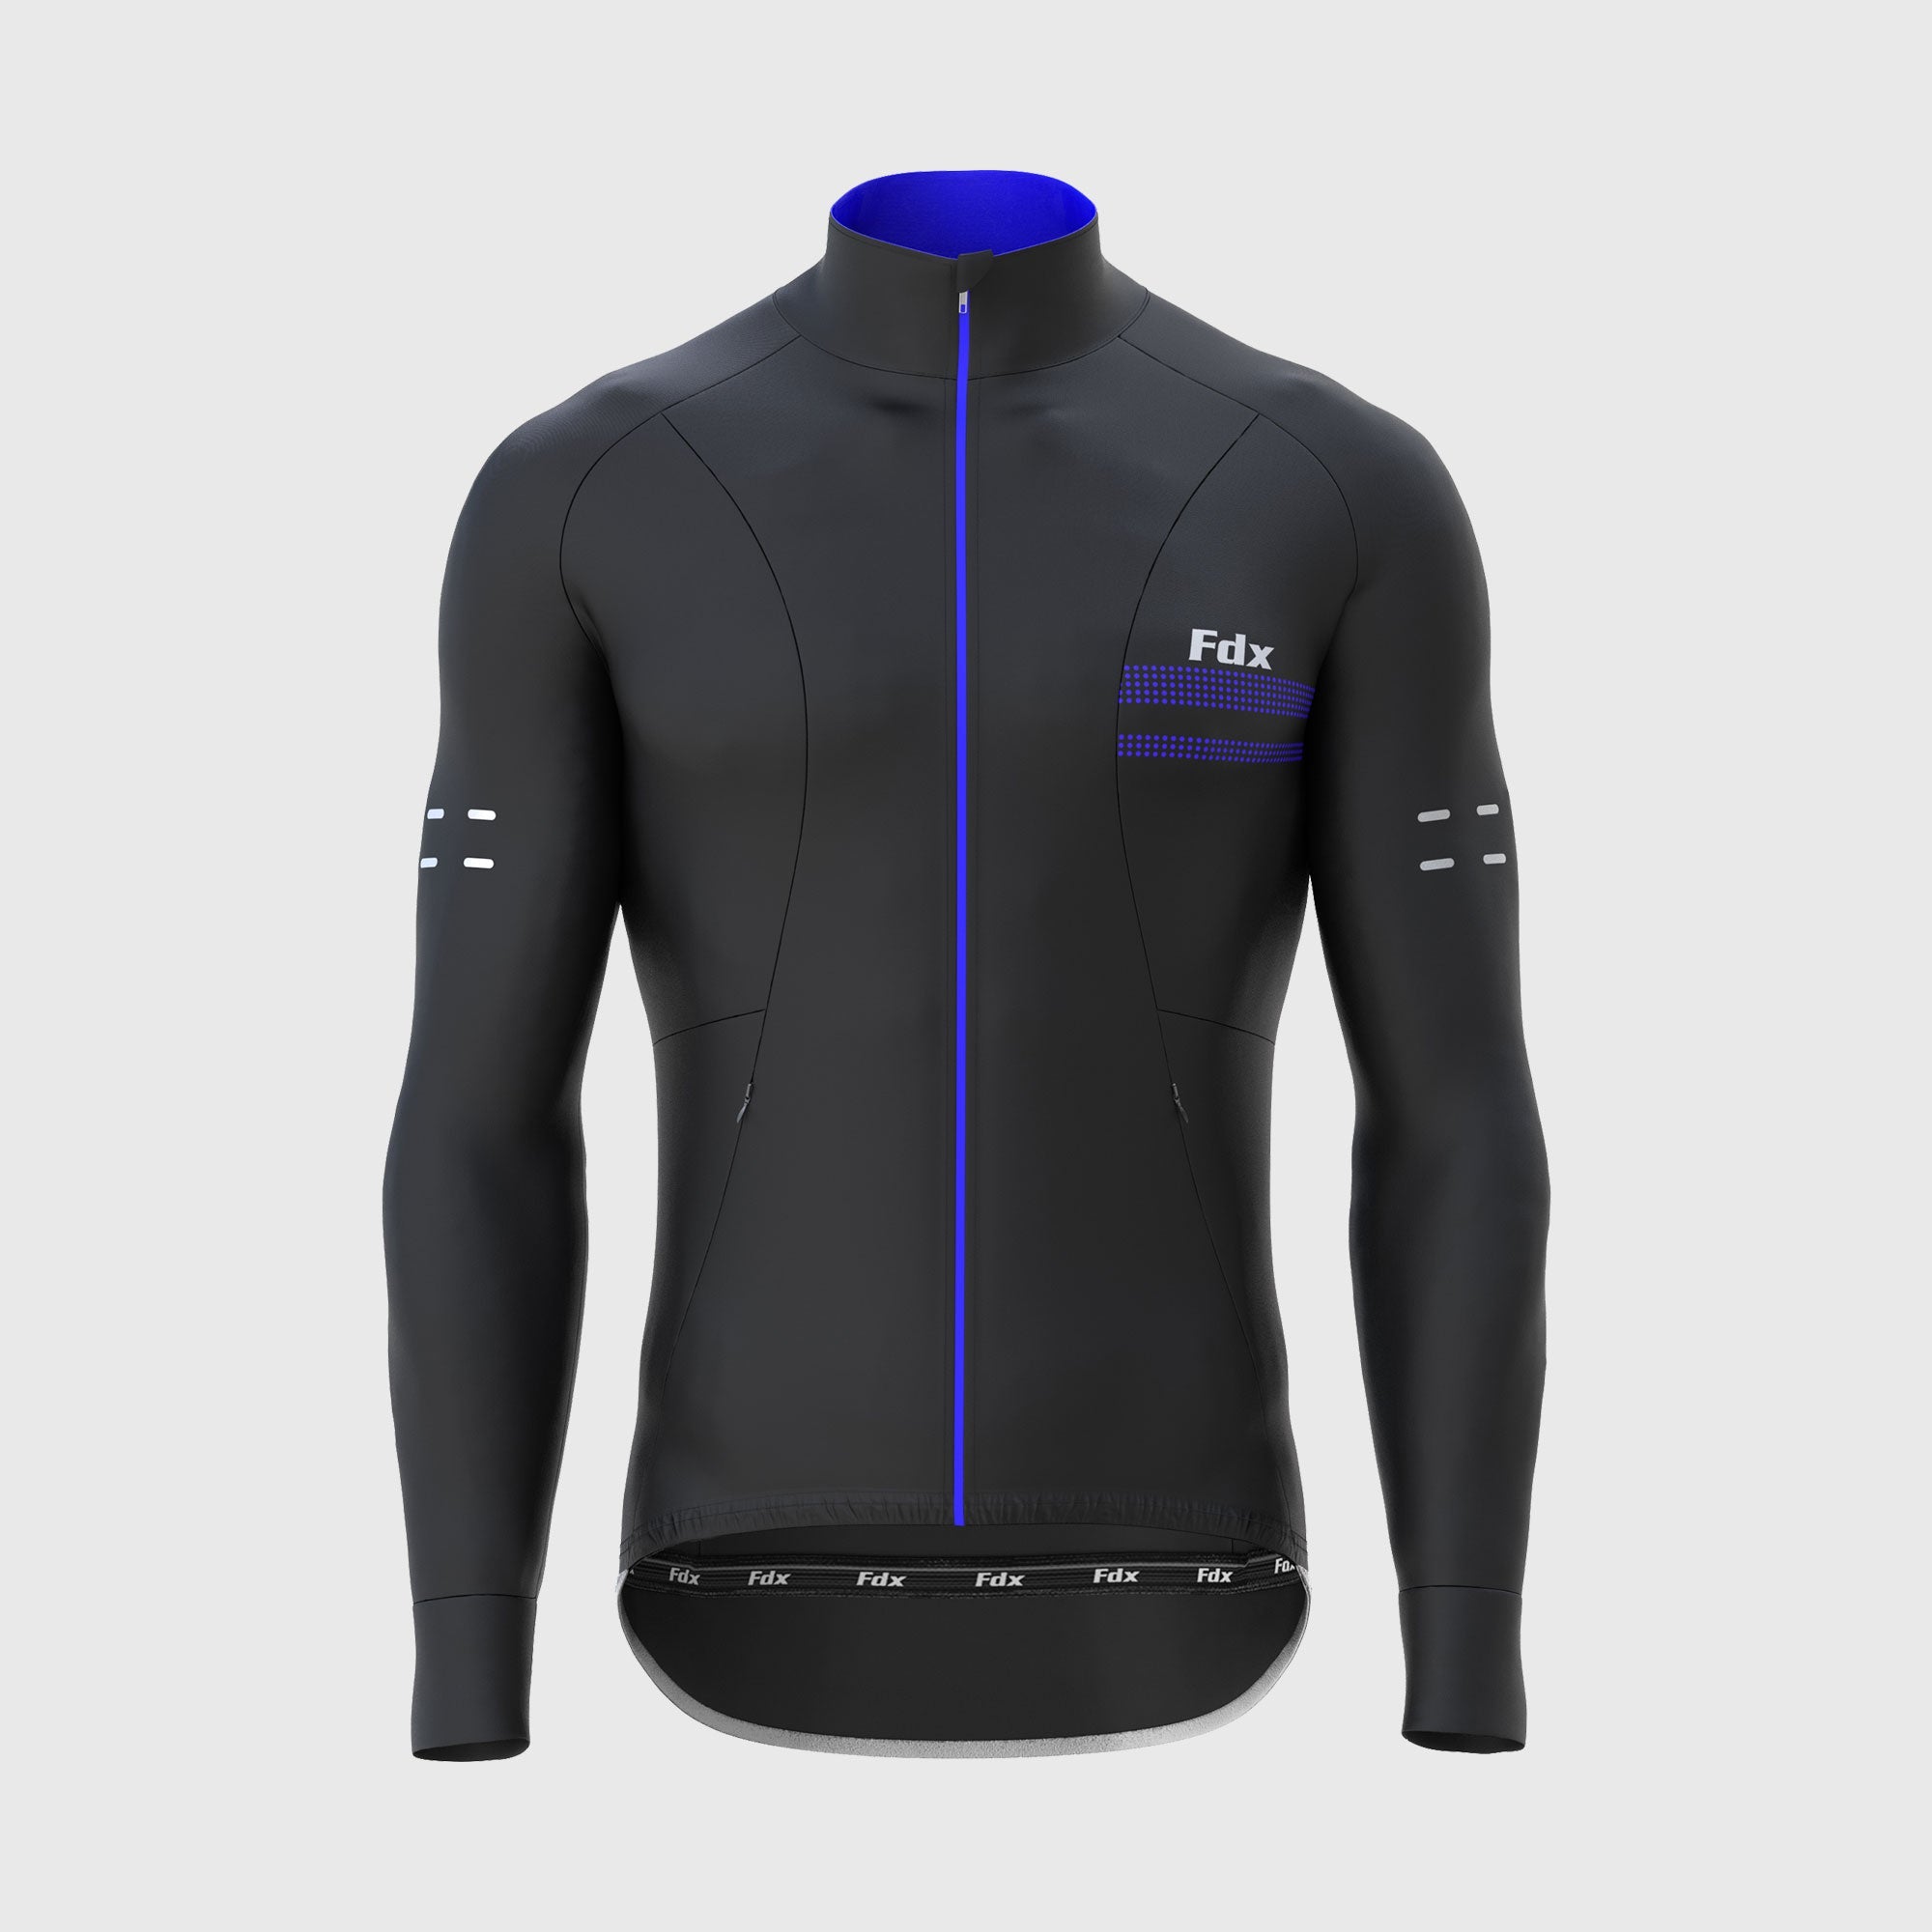 Fdx Arch Men's Blue Thermal Long Sleeve Cycling Jersey